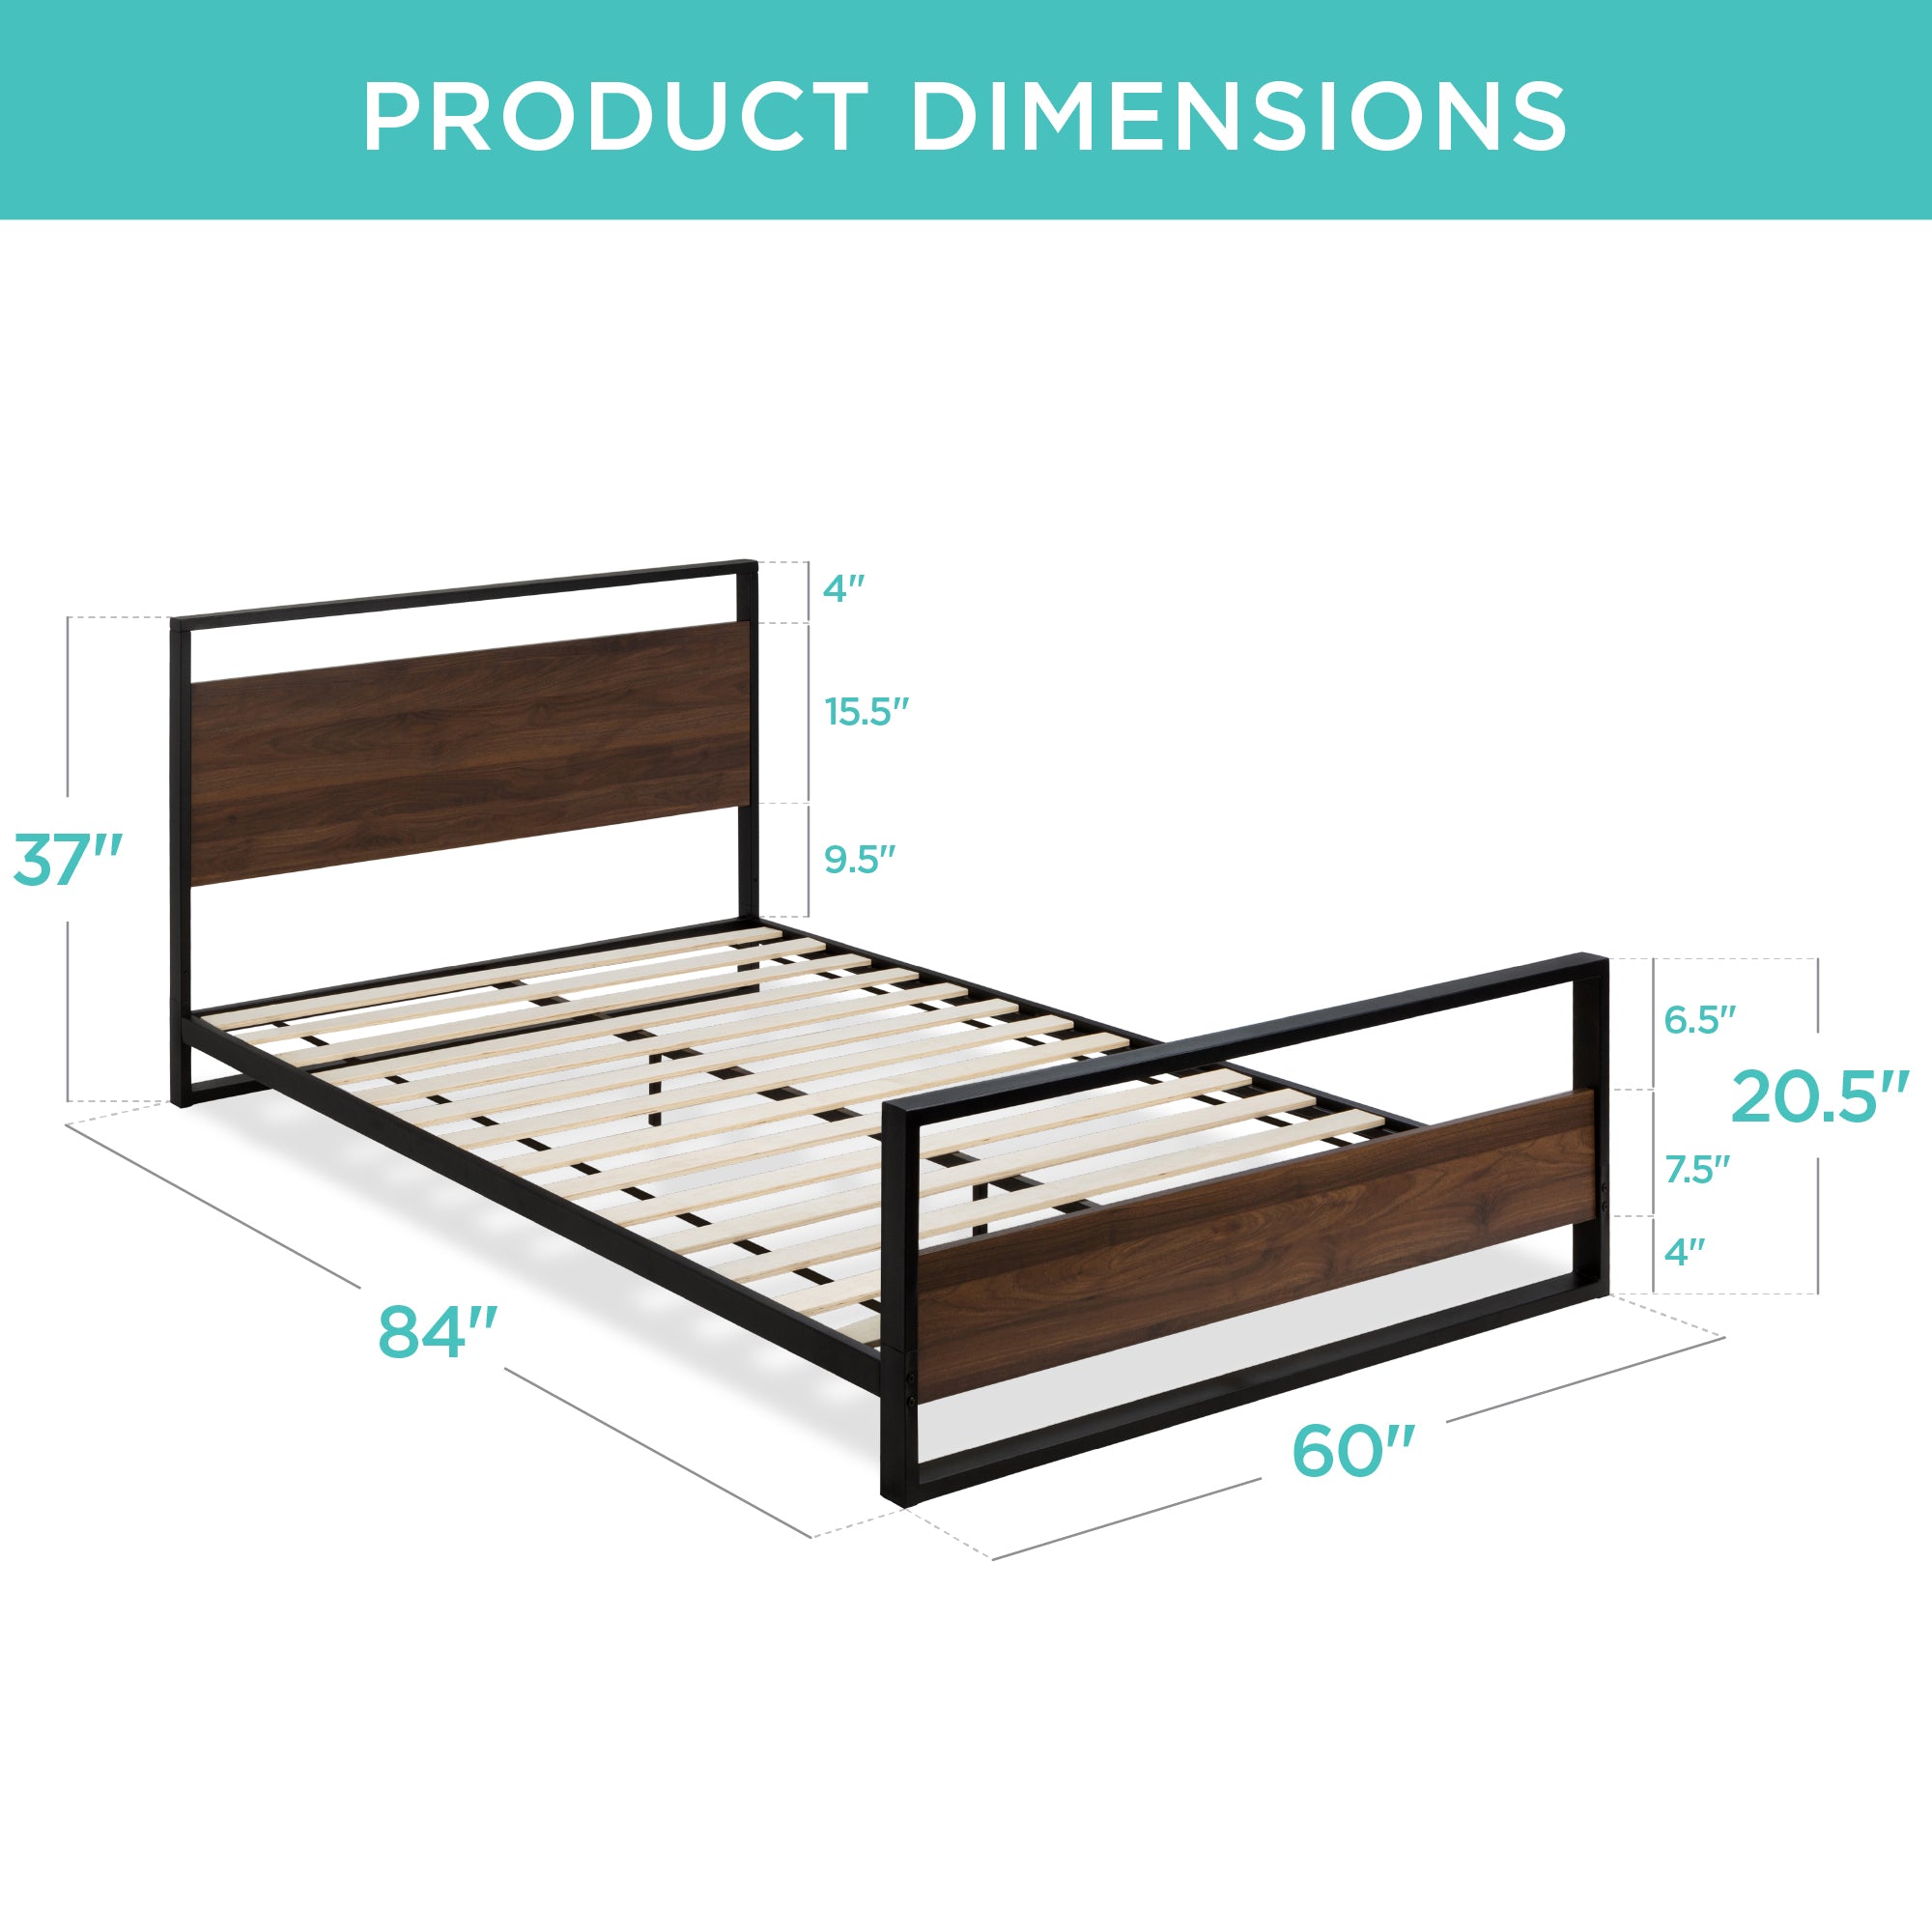 Zinus Suzanne Ironline Metal and Wood Platform Bed Frame with